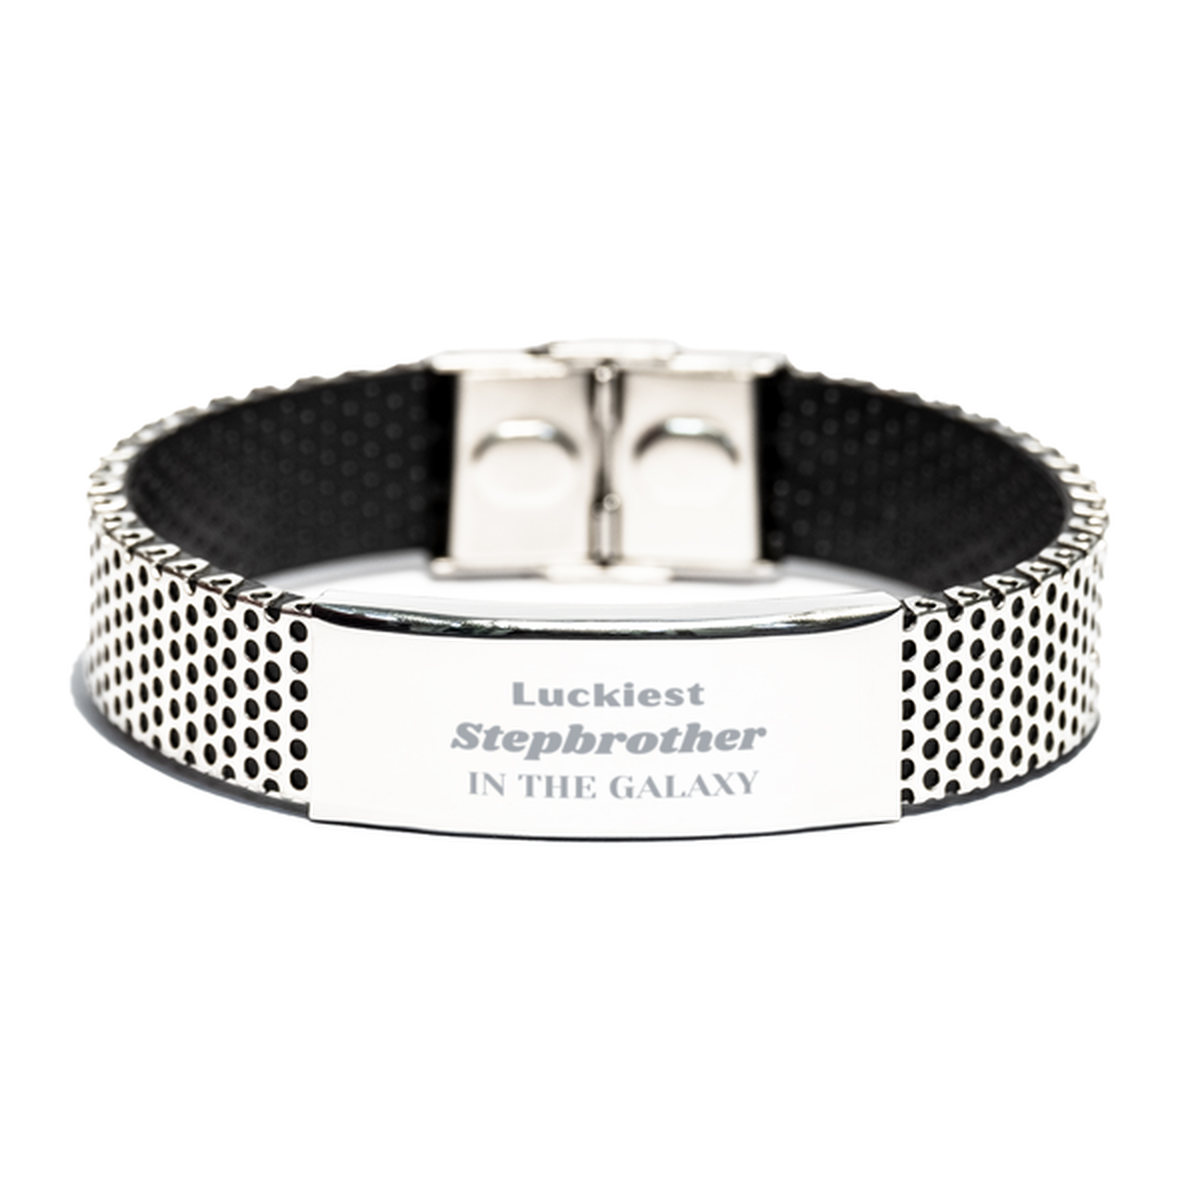 Luckiest Stepbrother in the Galaxy, To My Stepbrother Engraved Gifts, Christmas Stepbrother Stainless Steel Bracelet Gifts, X-mas Birthday Unique Gifts For Stepbrother Men Women